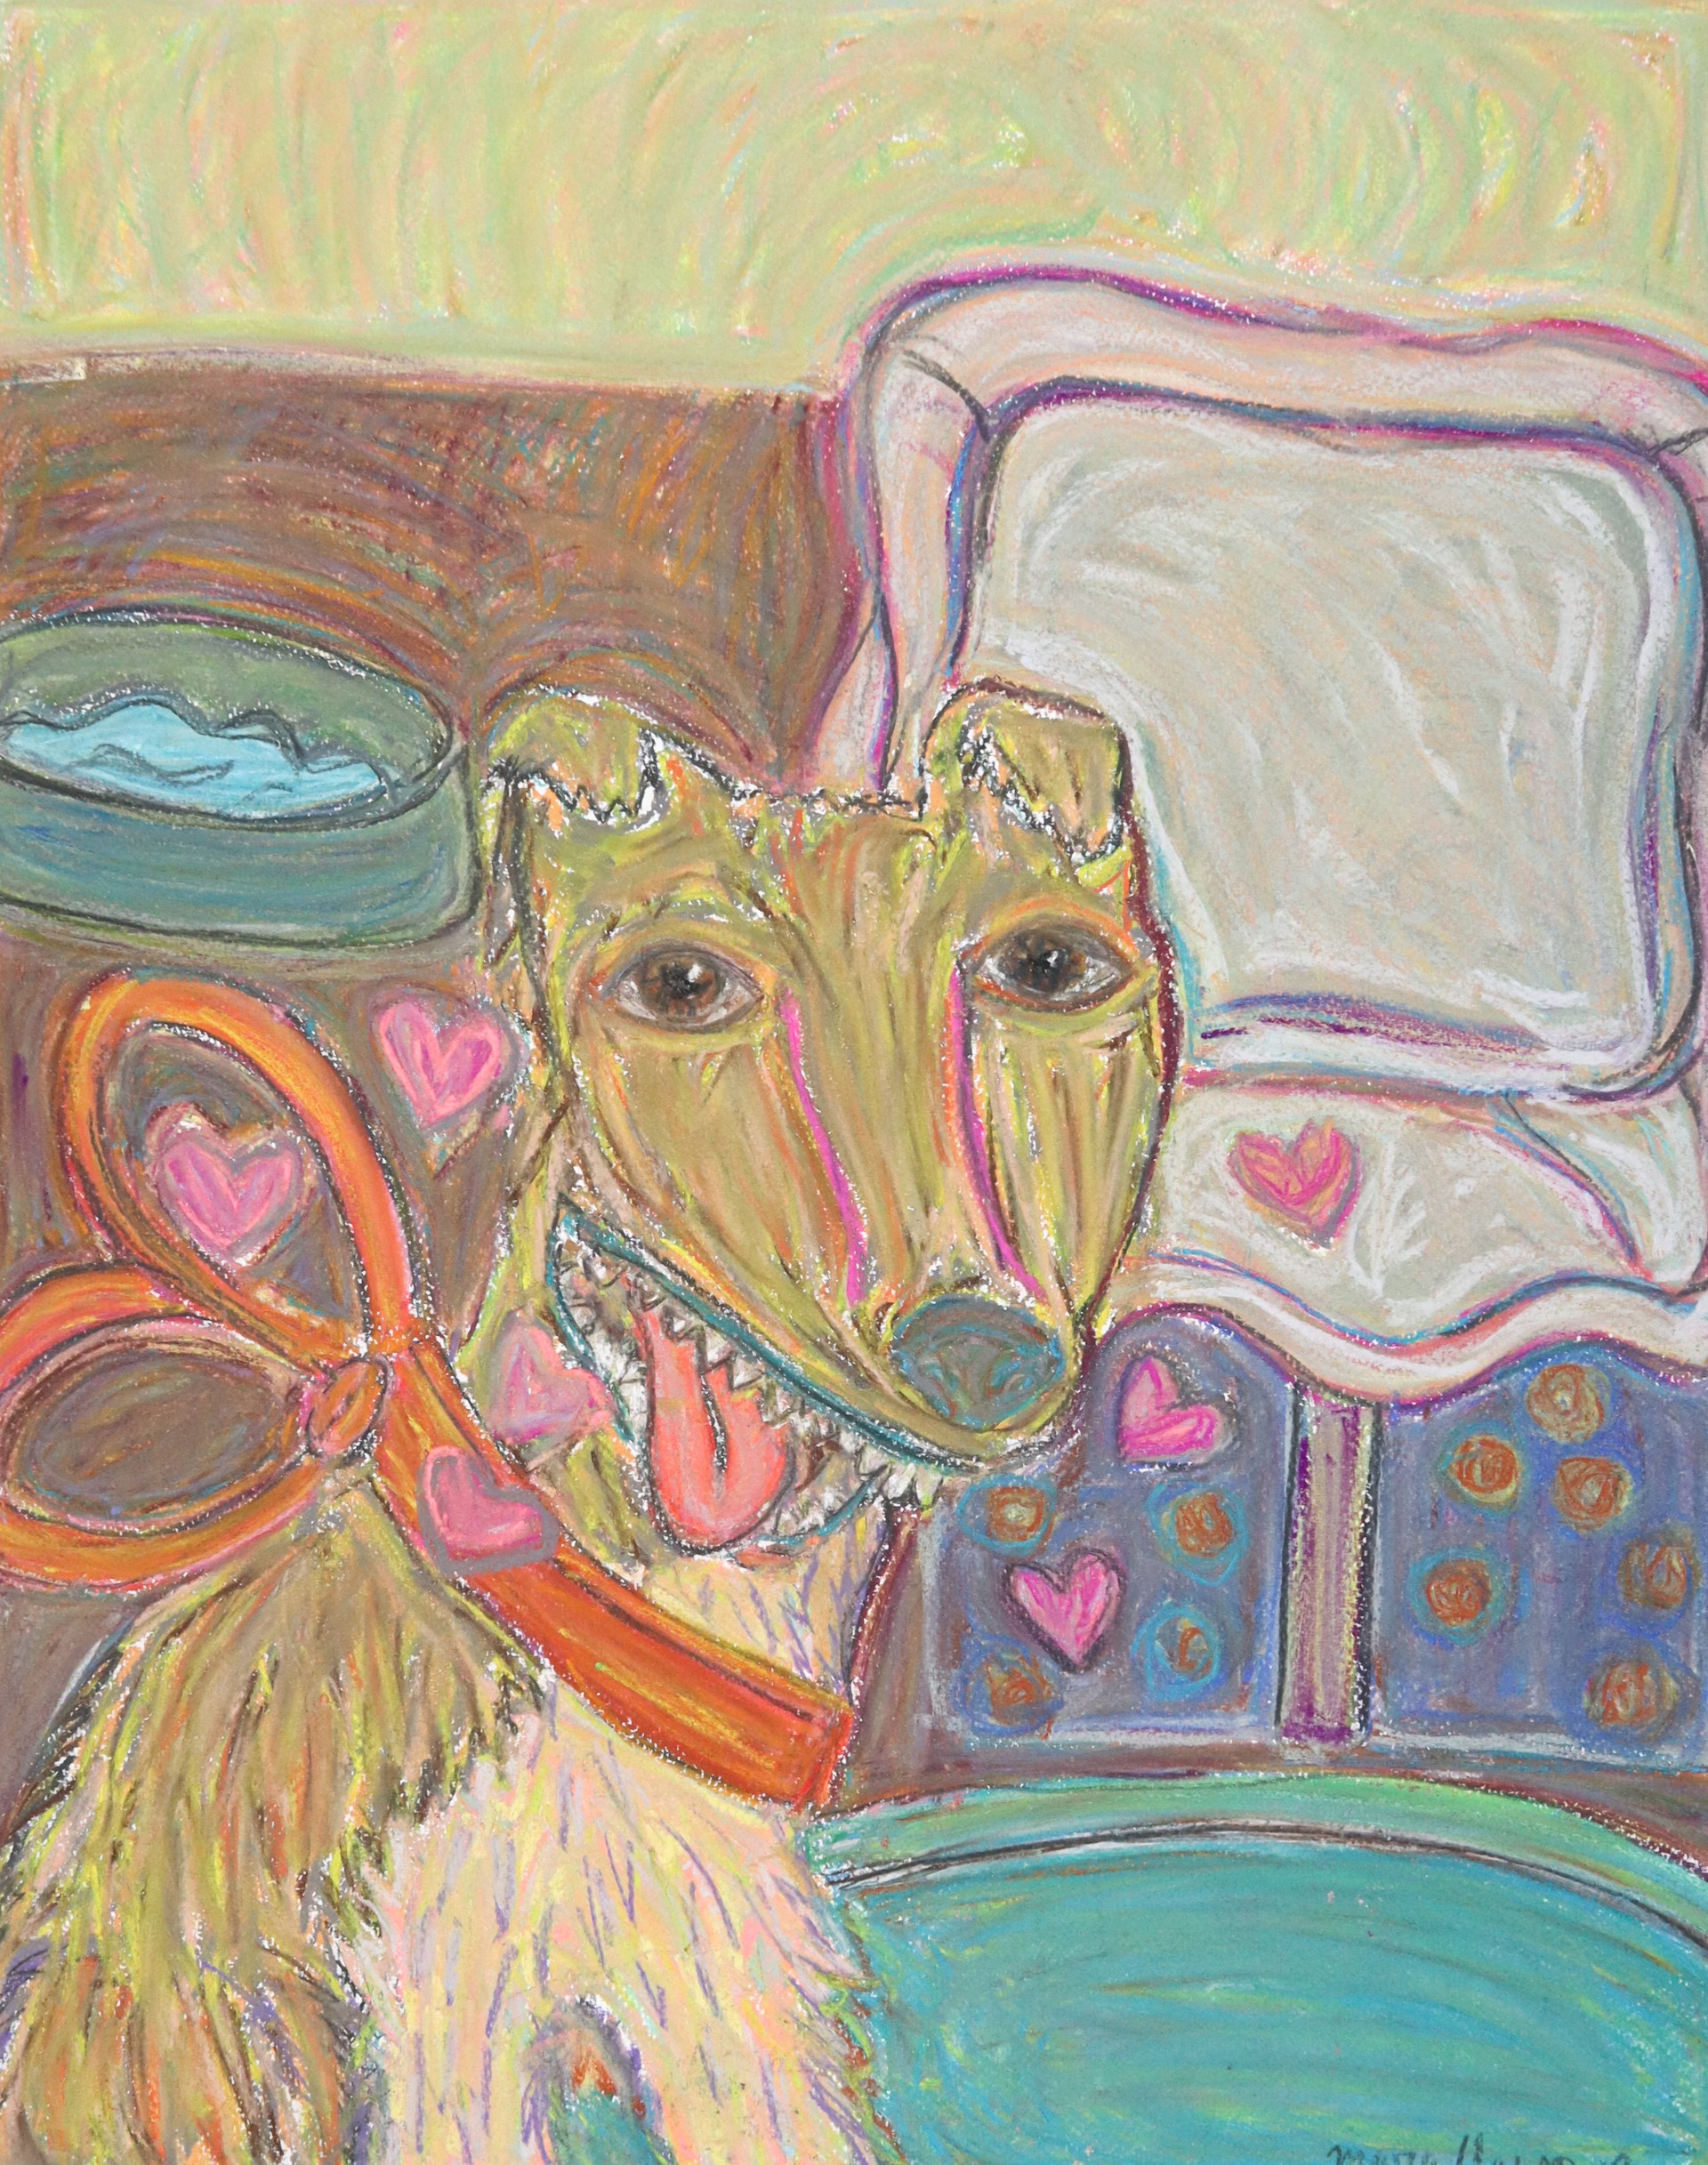 Welcome to the Lovable Dog by Mara Clawson